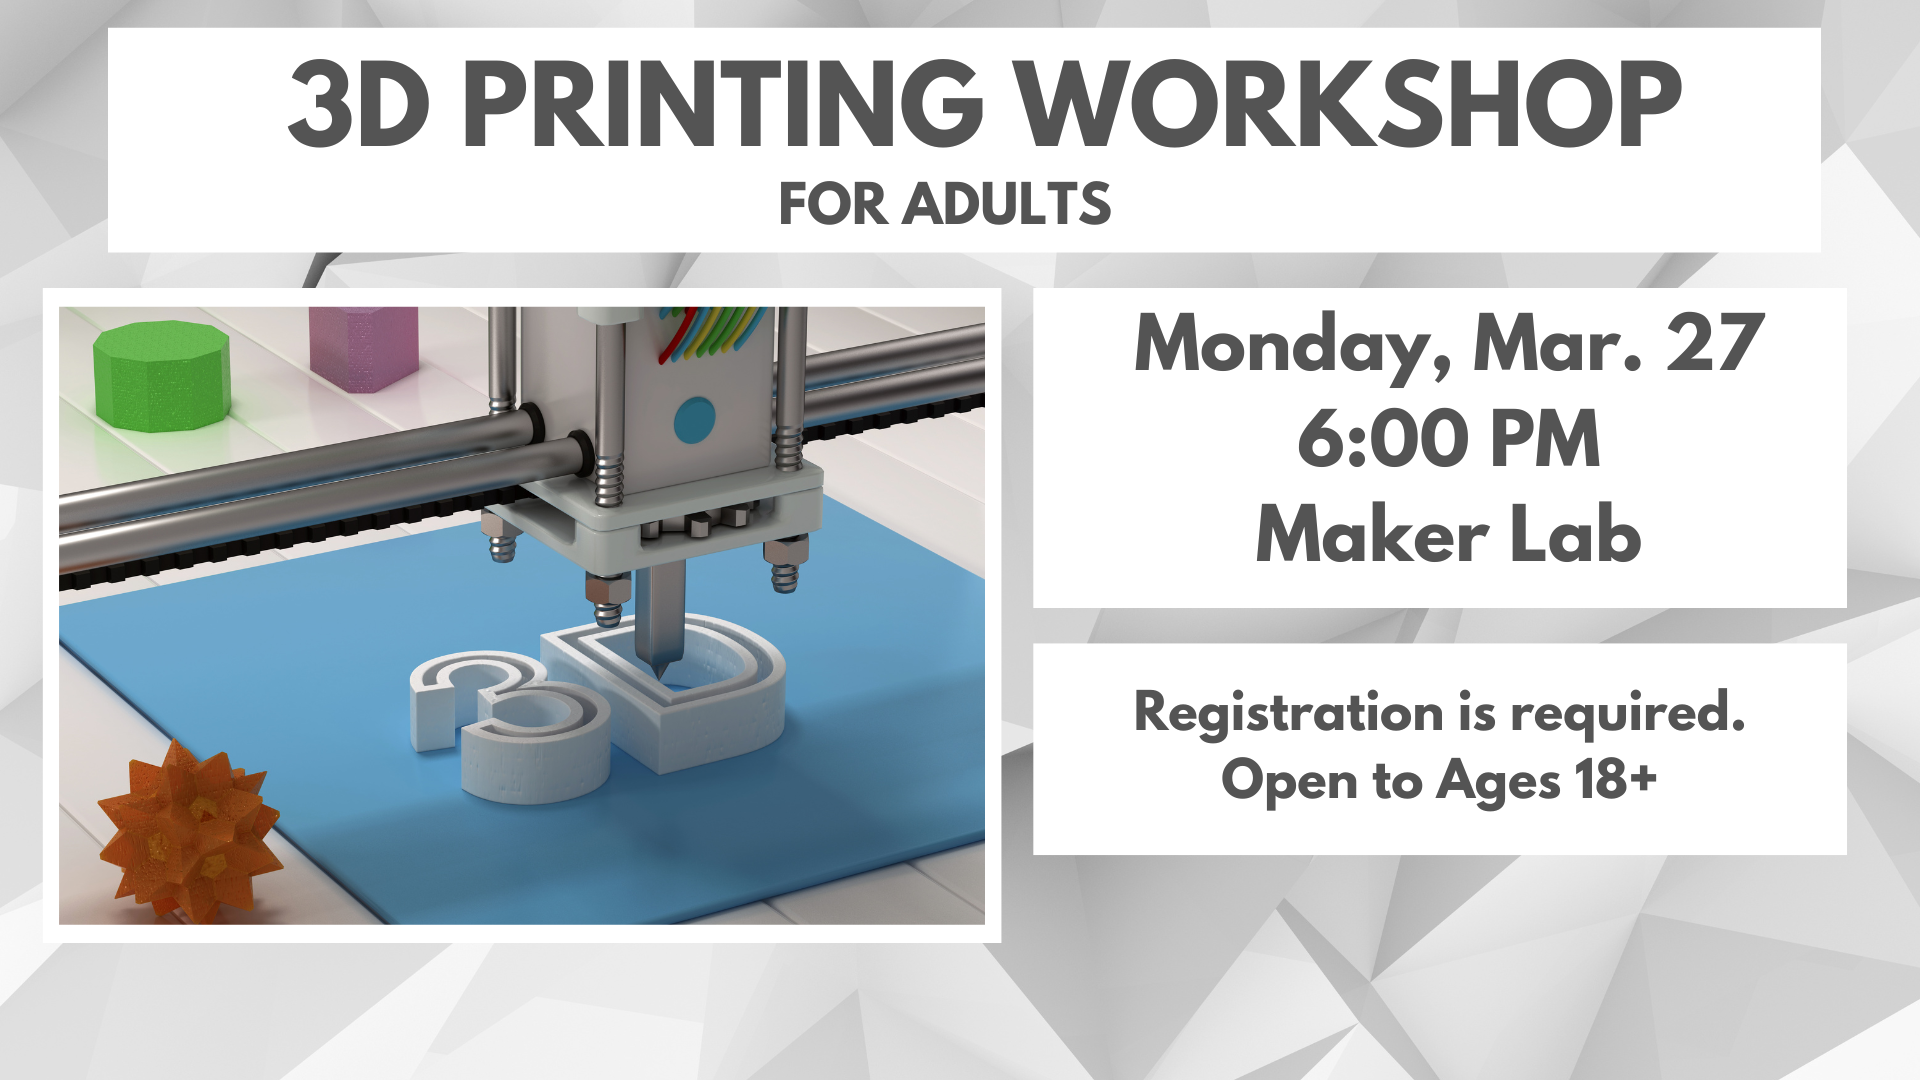 3D Printing Workshop for Adults